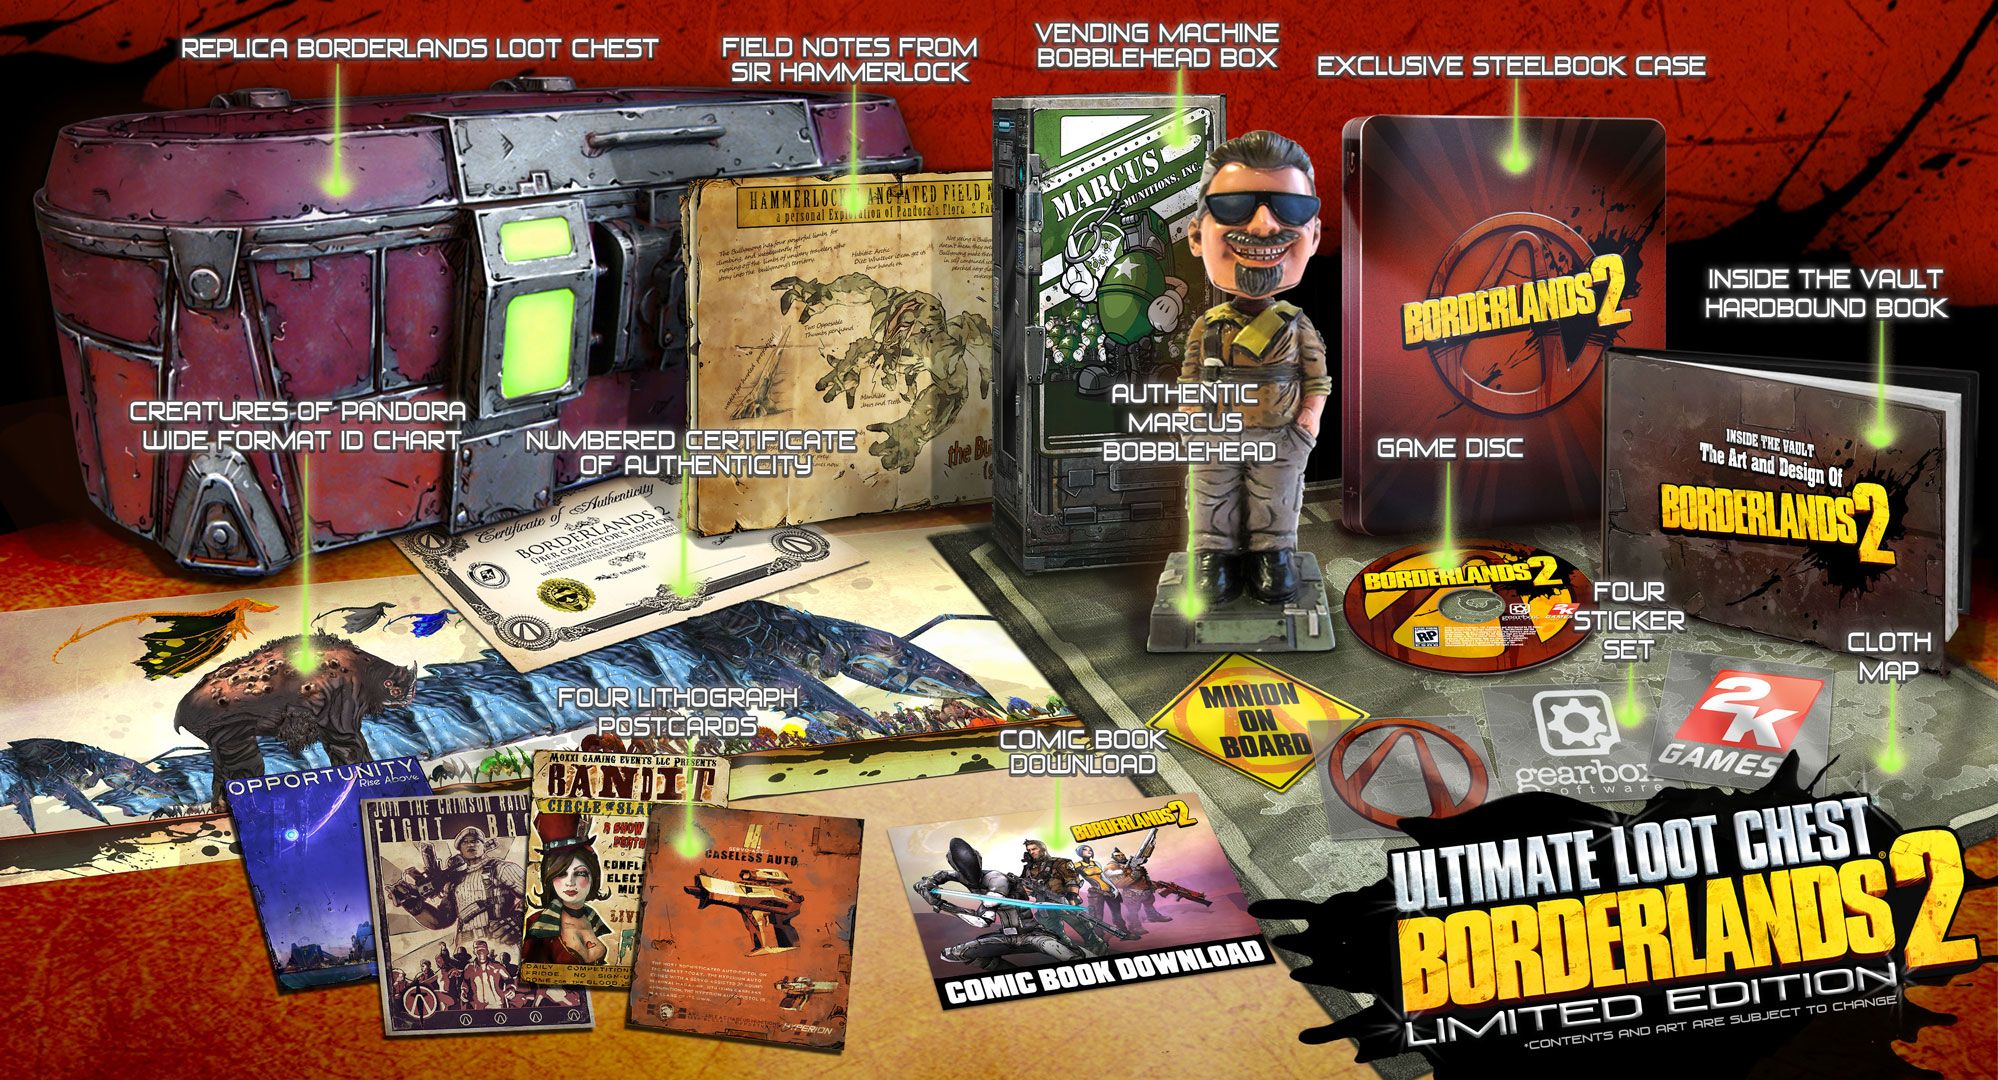 Borderlands 2 special editions announced